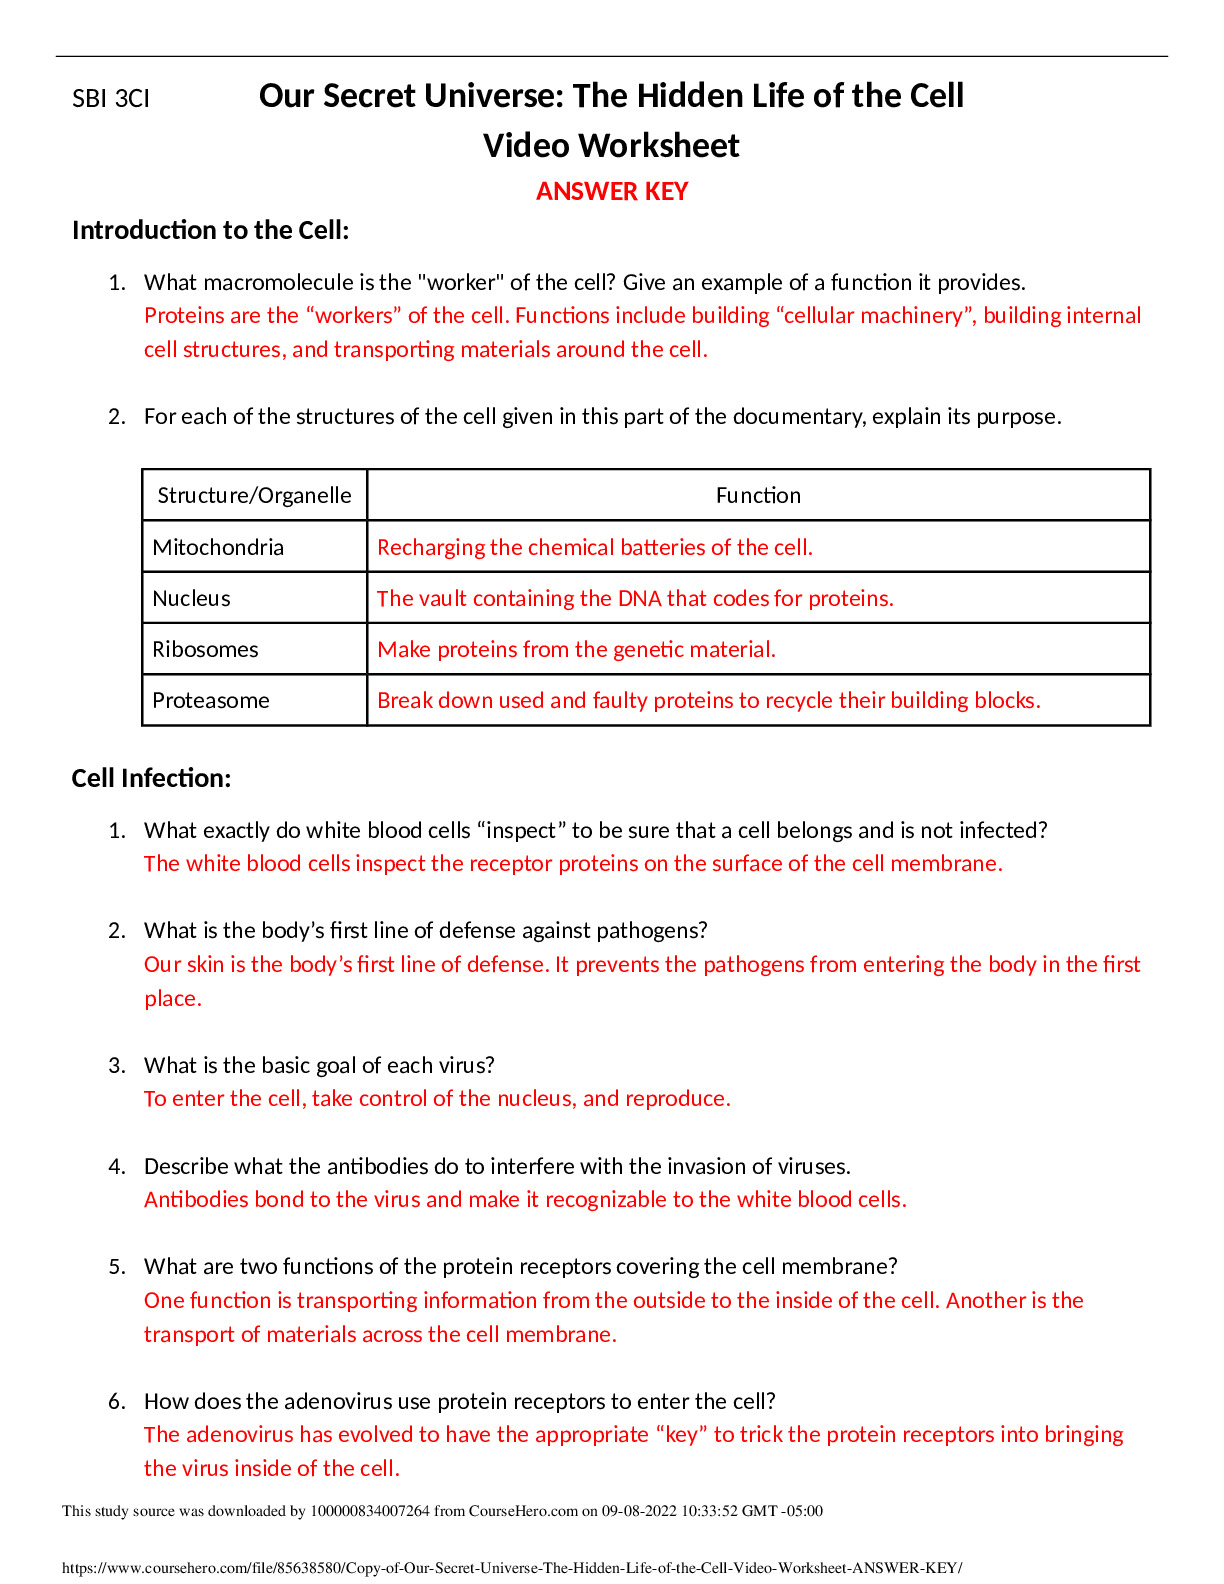 Copy_of_Our_Secret_Universe_The_Hidden_Life_of_the_Cell__Video_Worksheet___ANSWER_KEY_